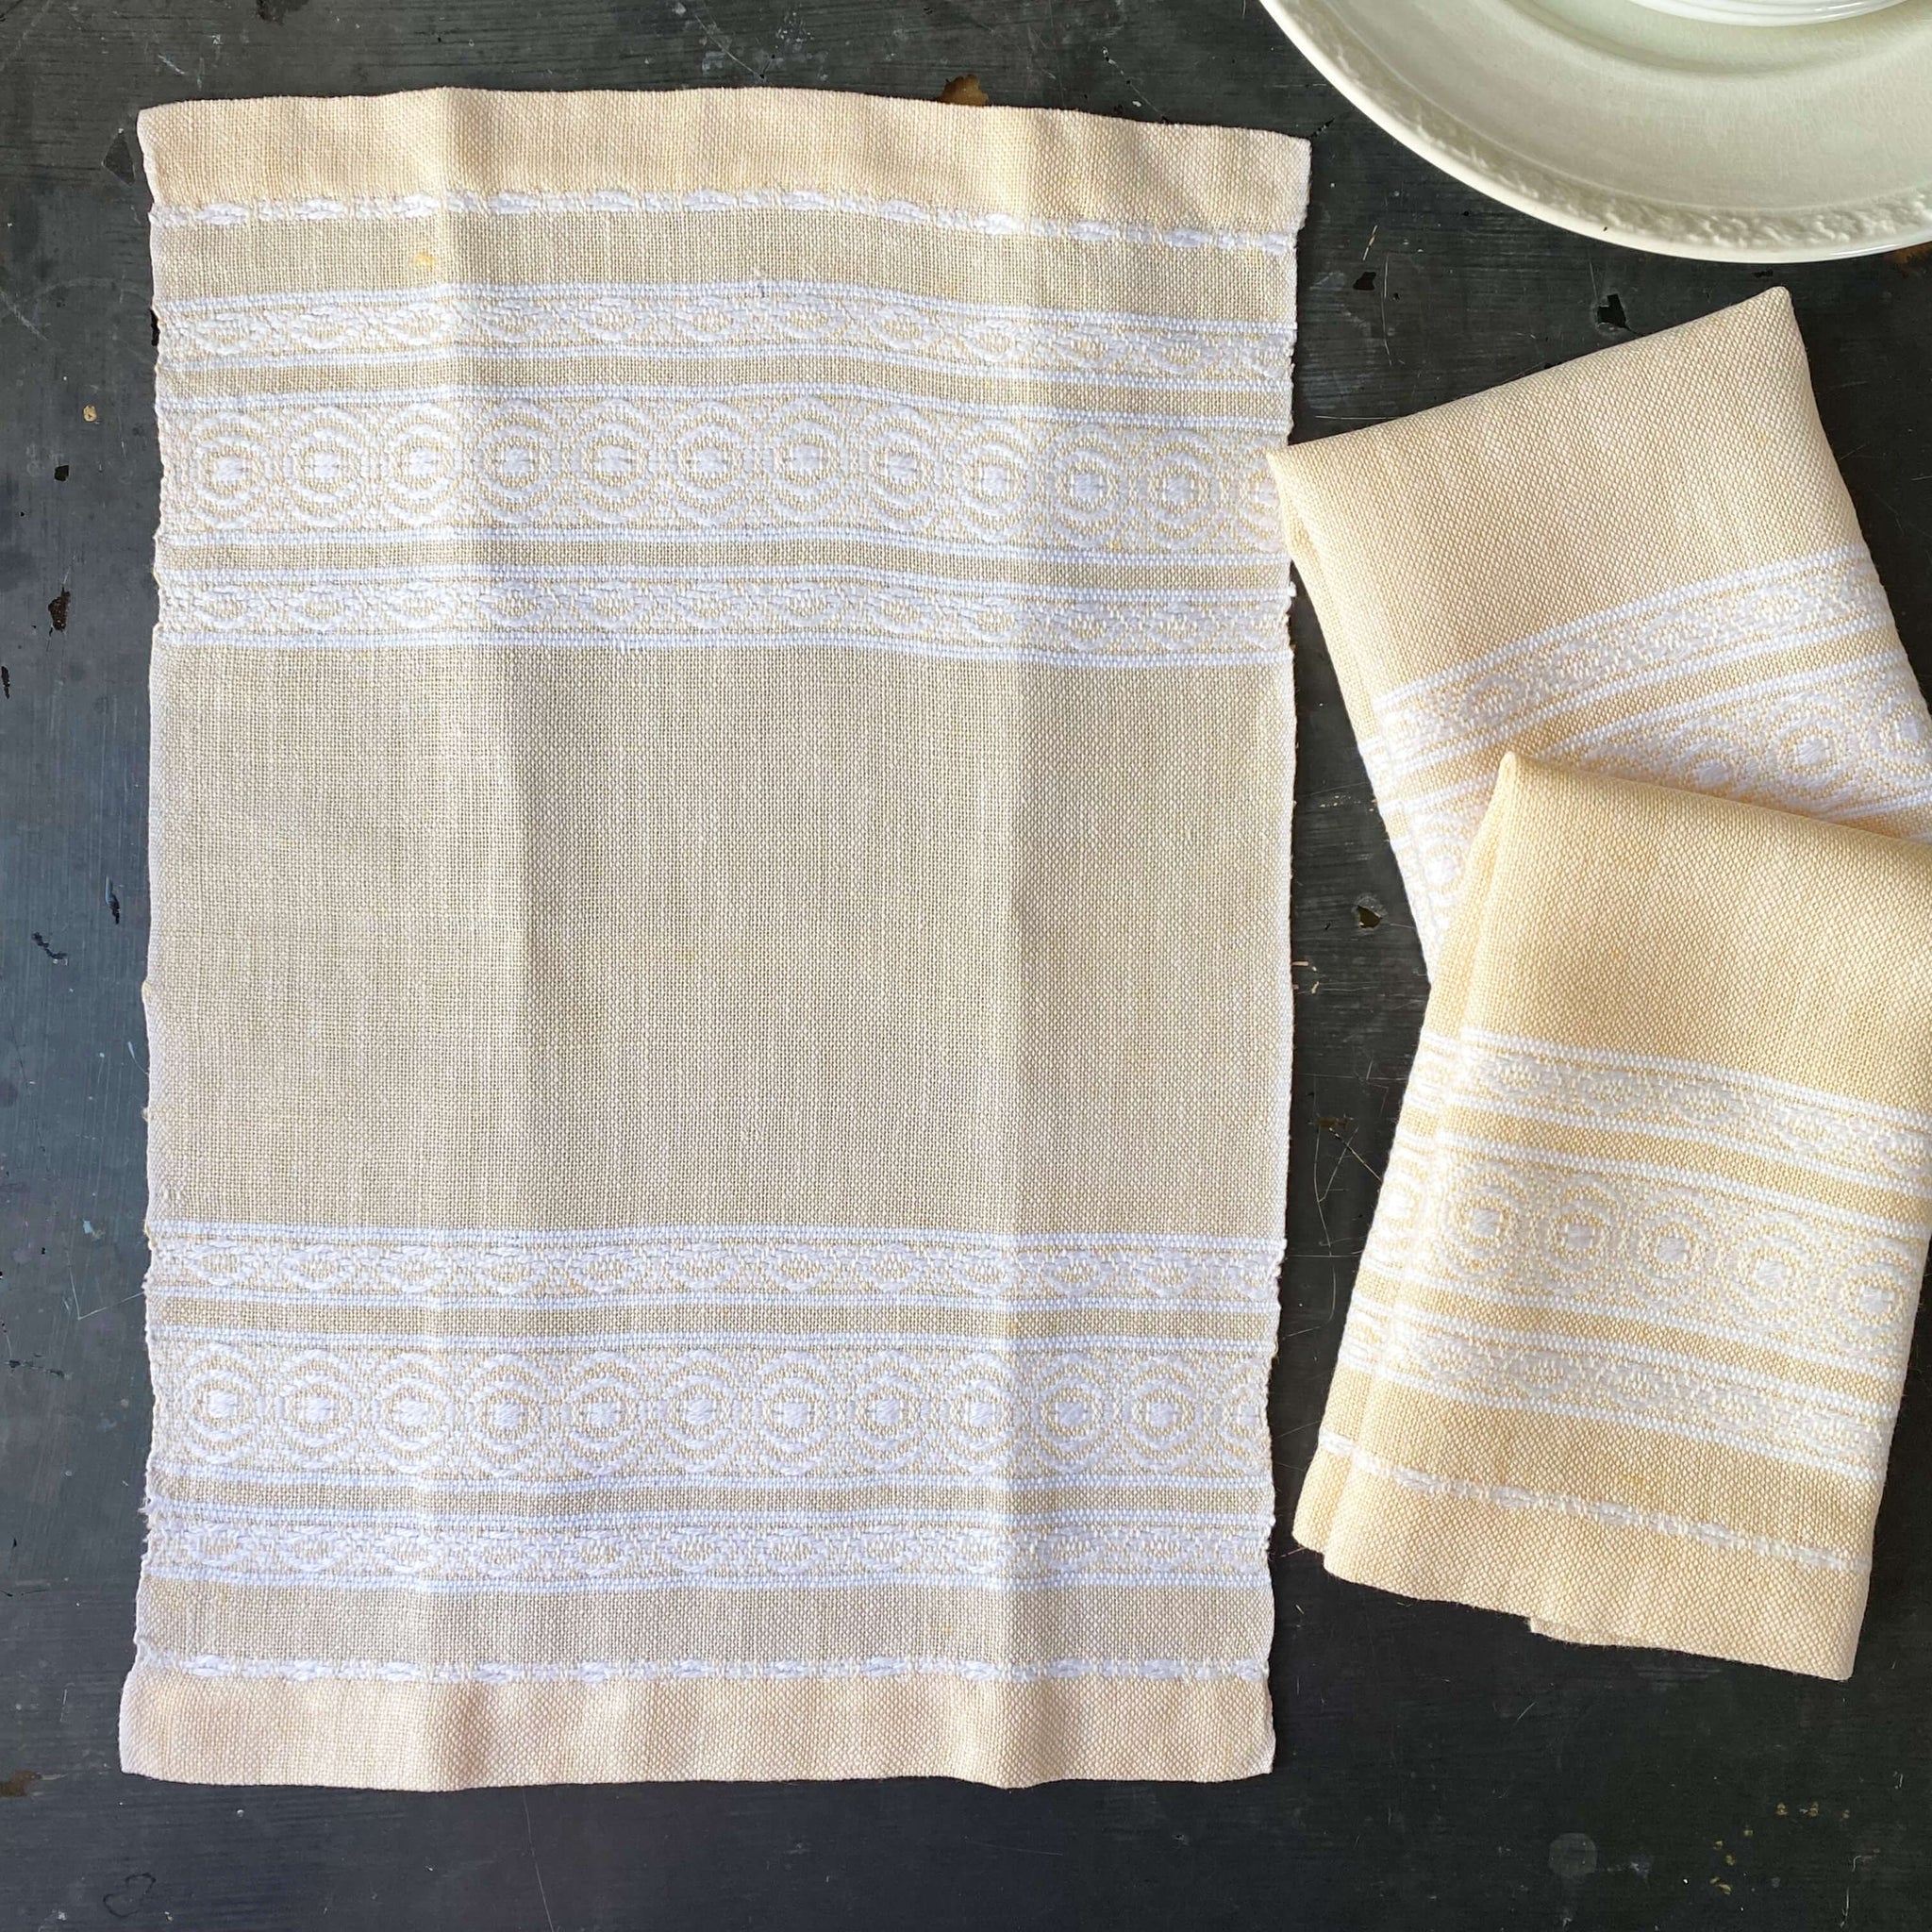 Vintage Rustic Style Pale Yellow Cloth Napkins with Decorative White Stripes - Set of Three